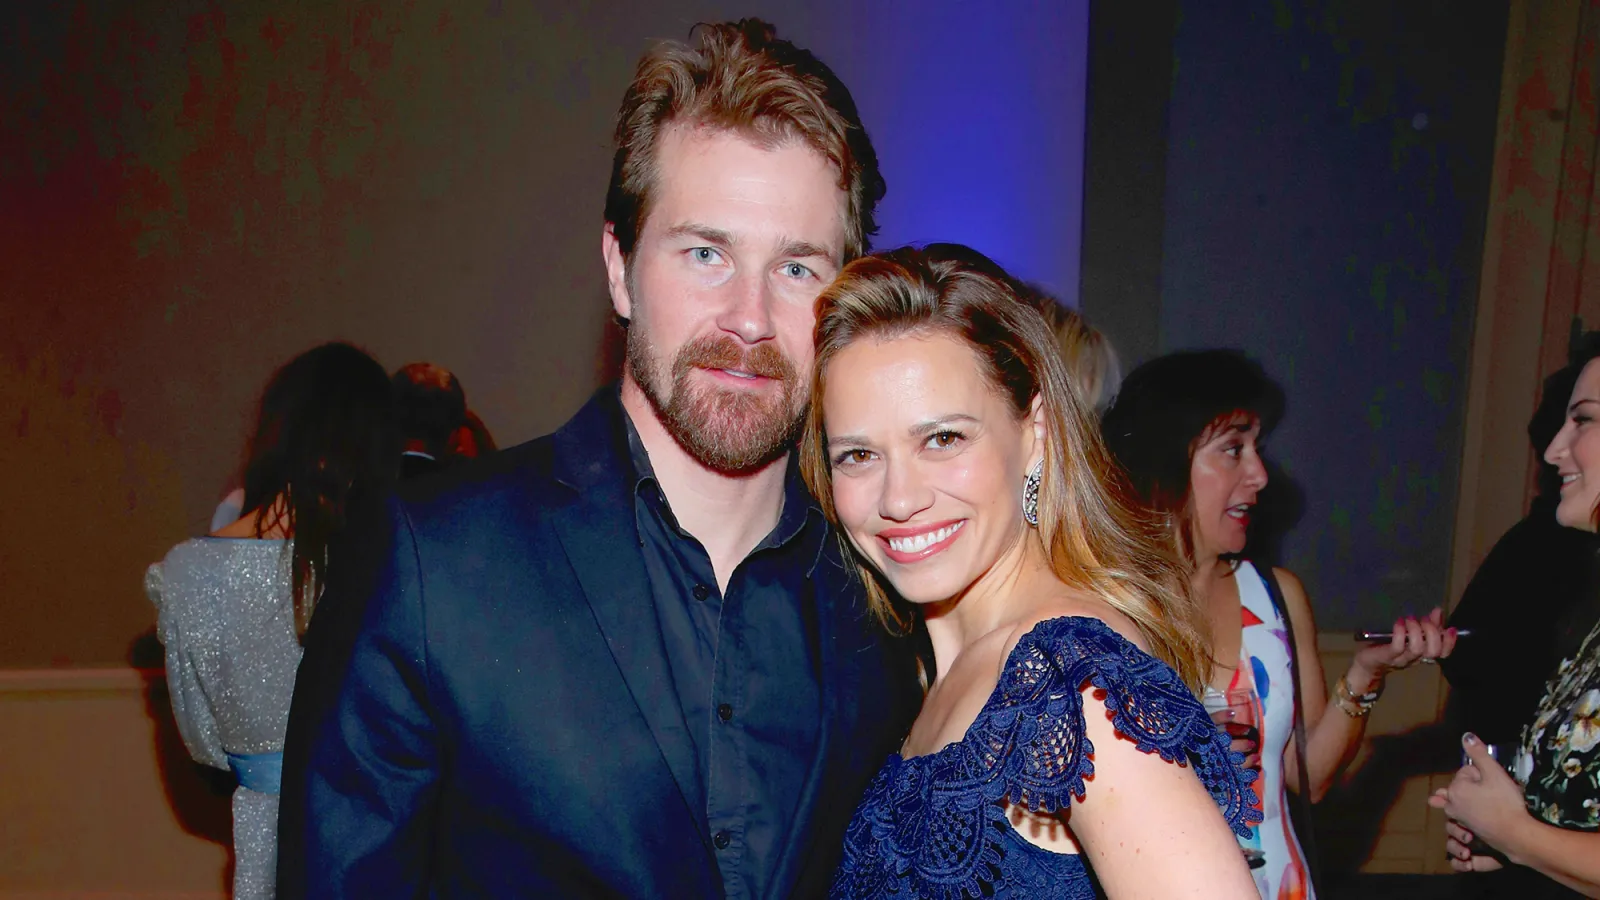 Who Is Bethany Joy Lenz Dating?